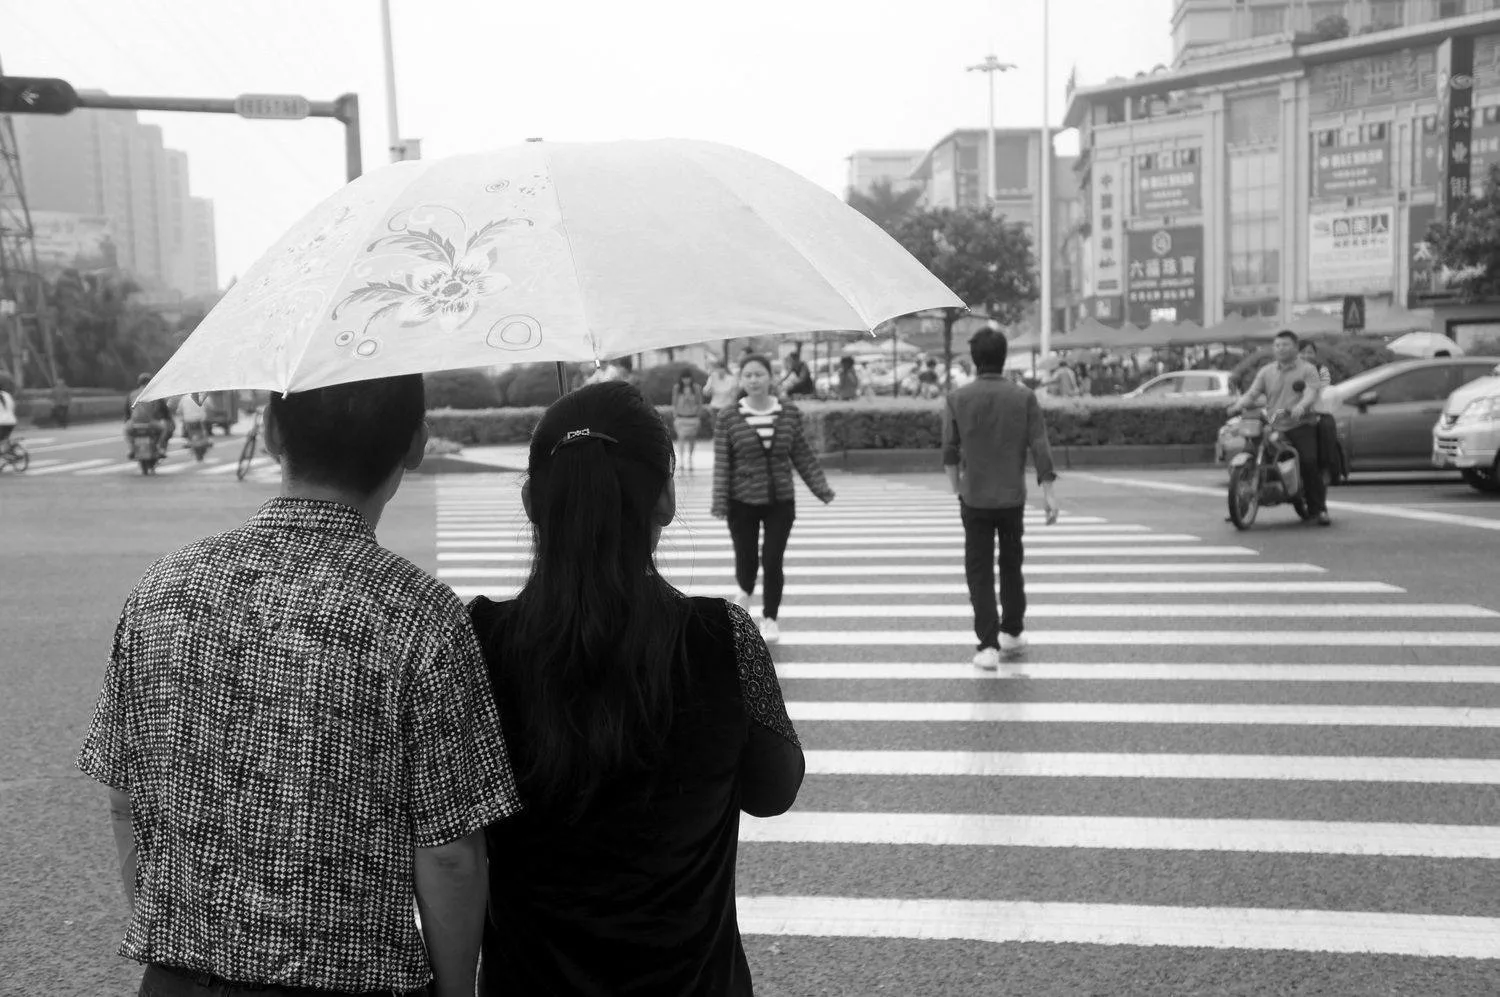 Lovers out for a stroll in Dongguan, the "Sex Capital of China" (this is China's "sin city")